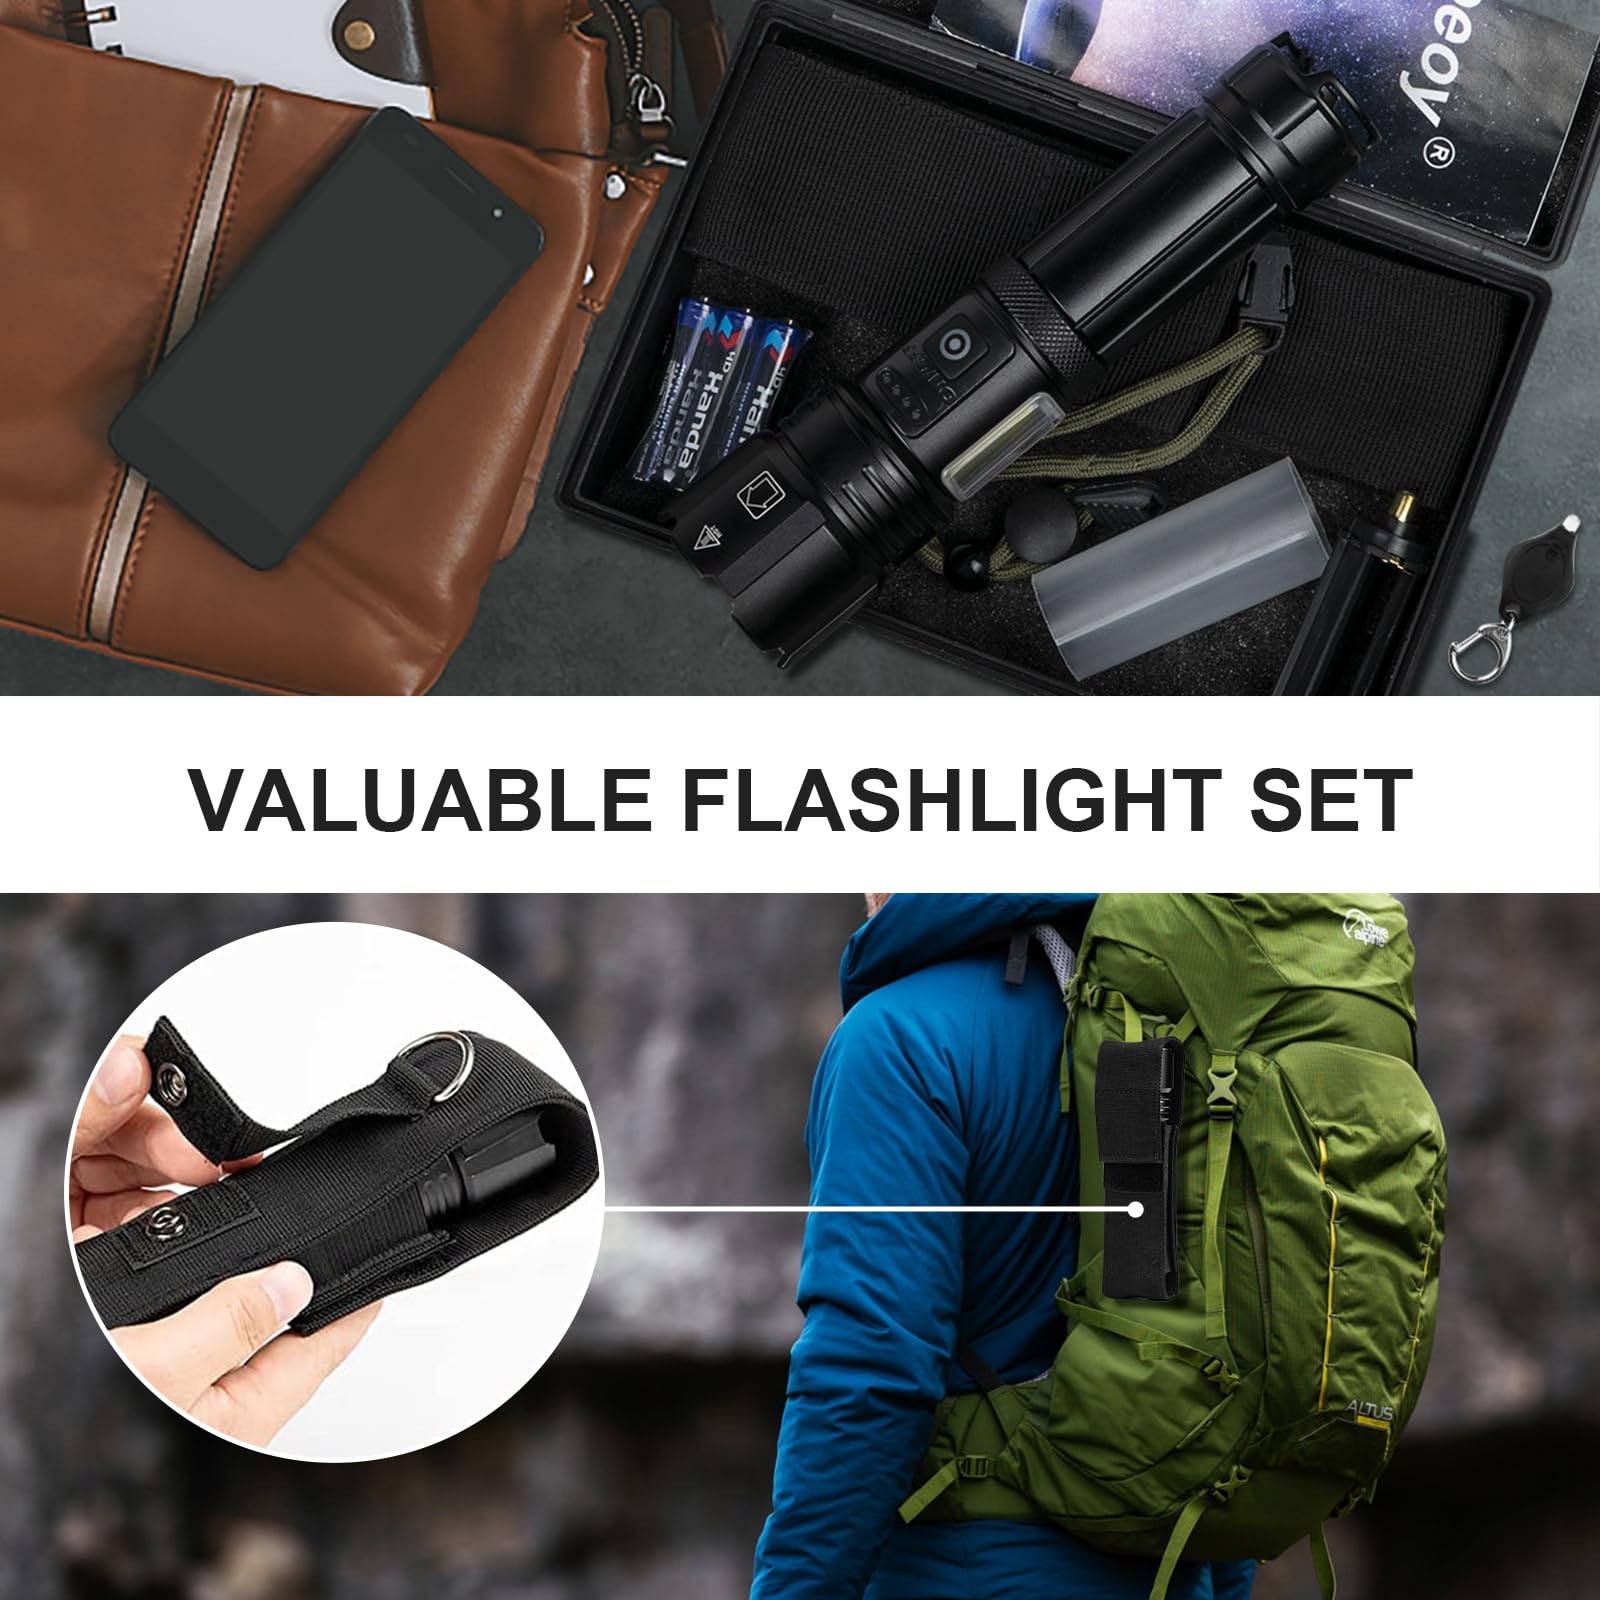 Sigoobal Flashlights High Lumens Rechargeable, 990000 Lumens Bright Flashlight, High Powered Handheld LED Flash Lights, 15h Runtime, IPX7 Waterproof with Flashlight Sleeve for Home, Camping, 7 Modes